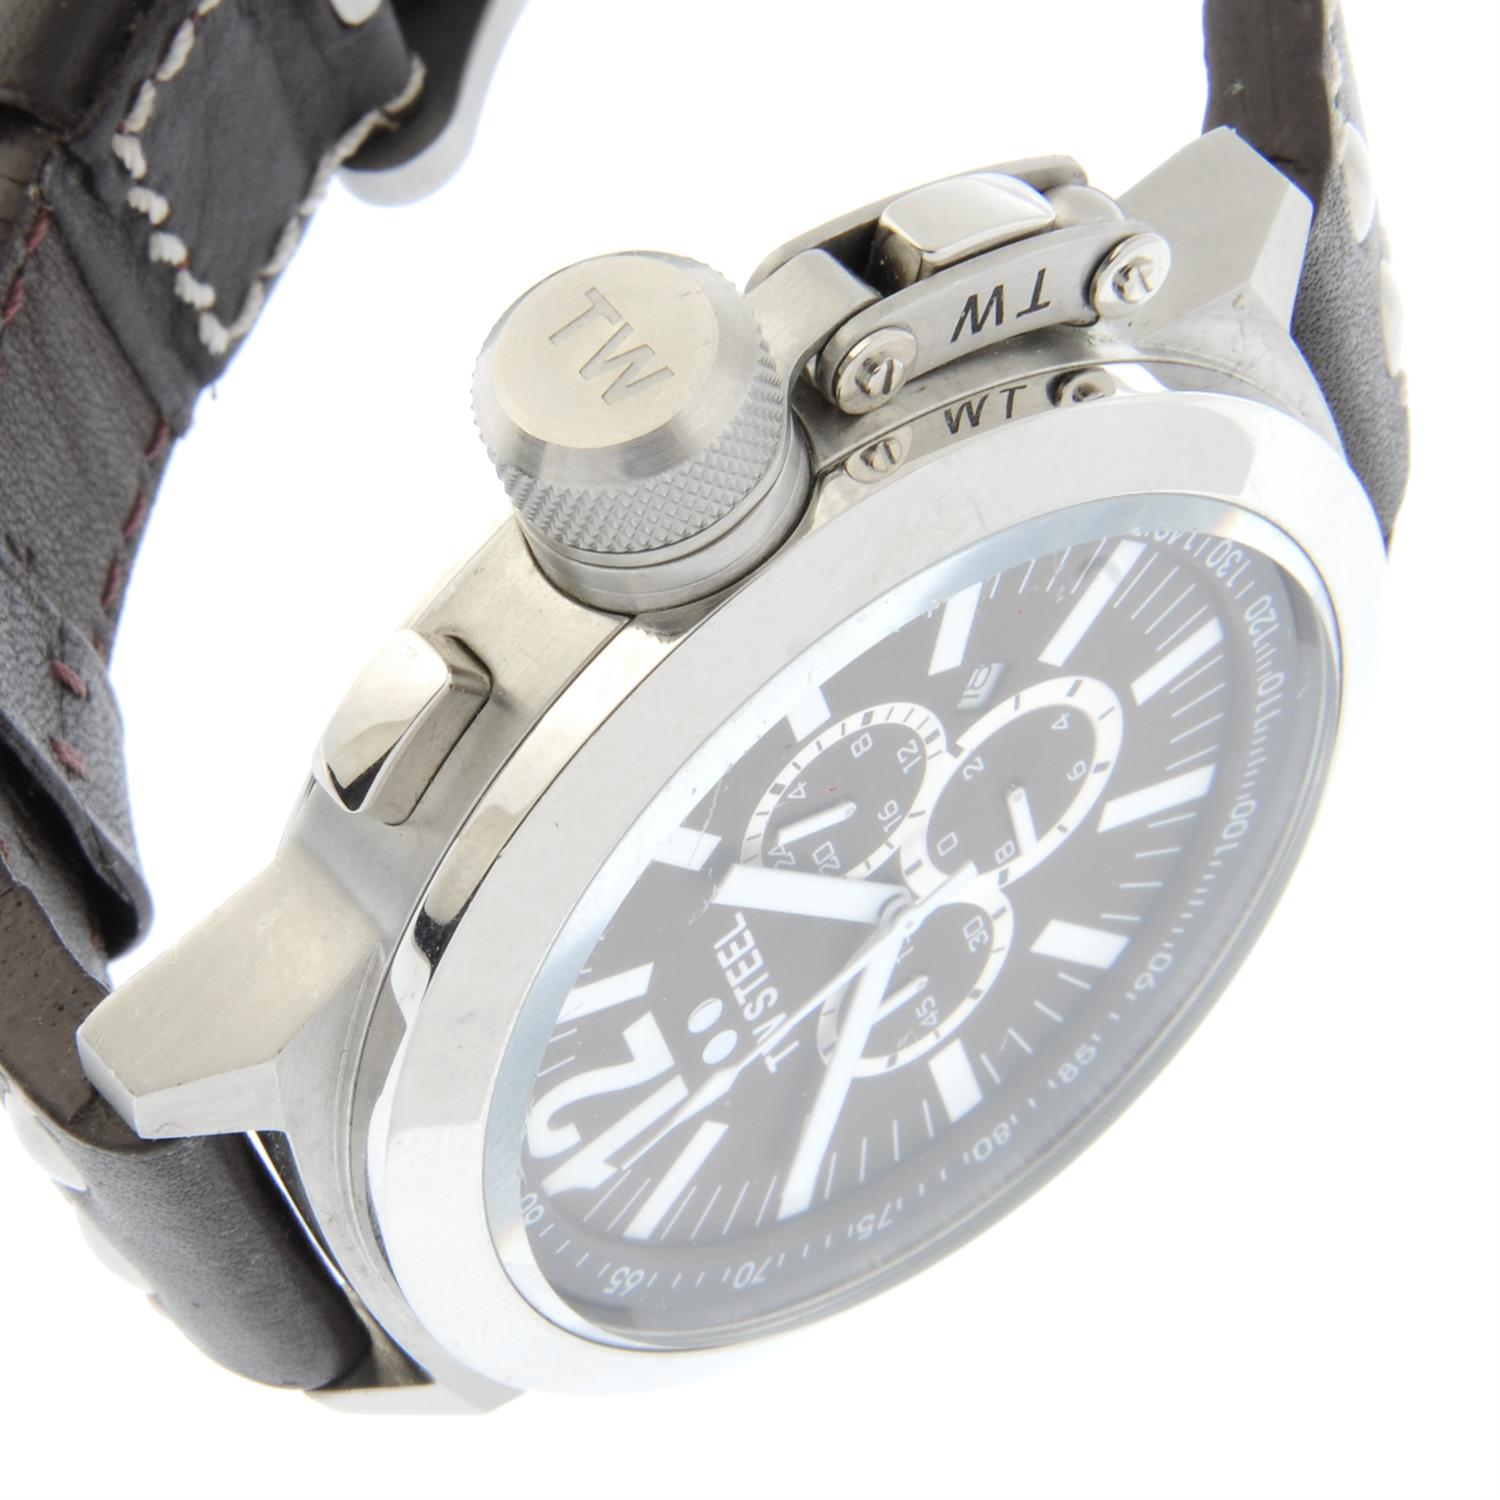 T.W Steel - a chronograph watch, 50mm. - Image 3 of 4